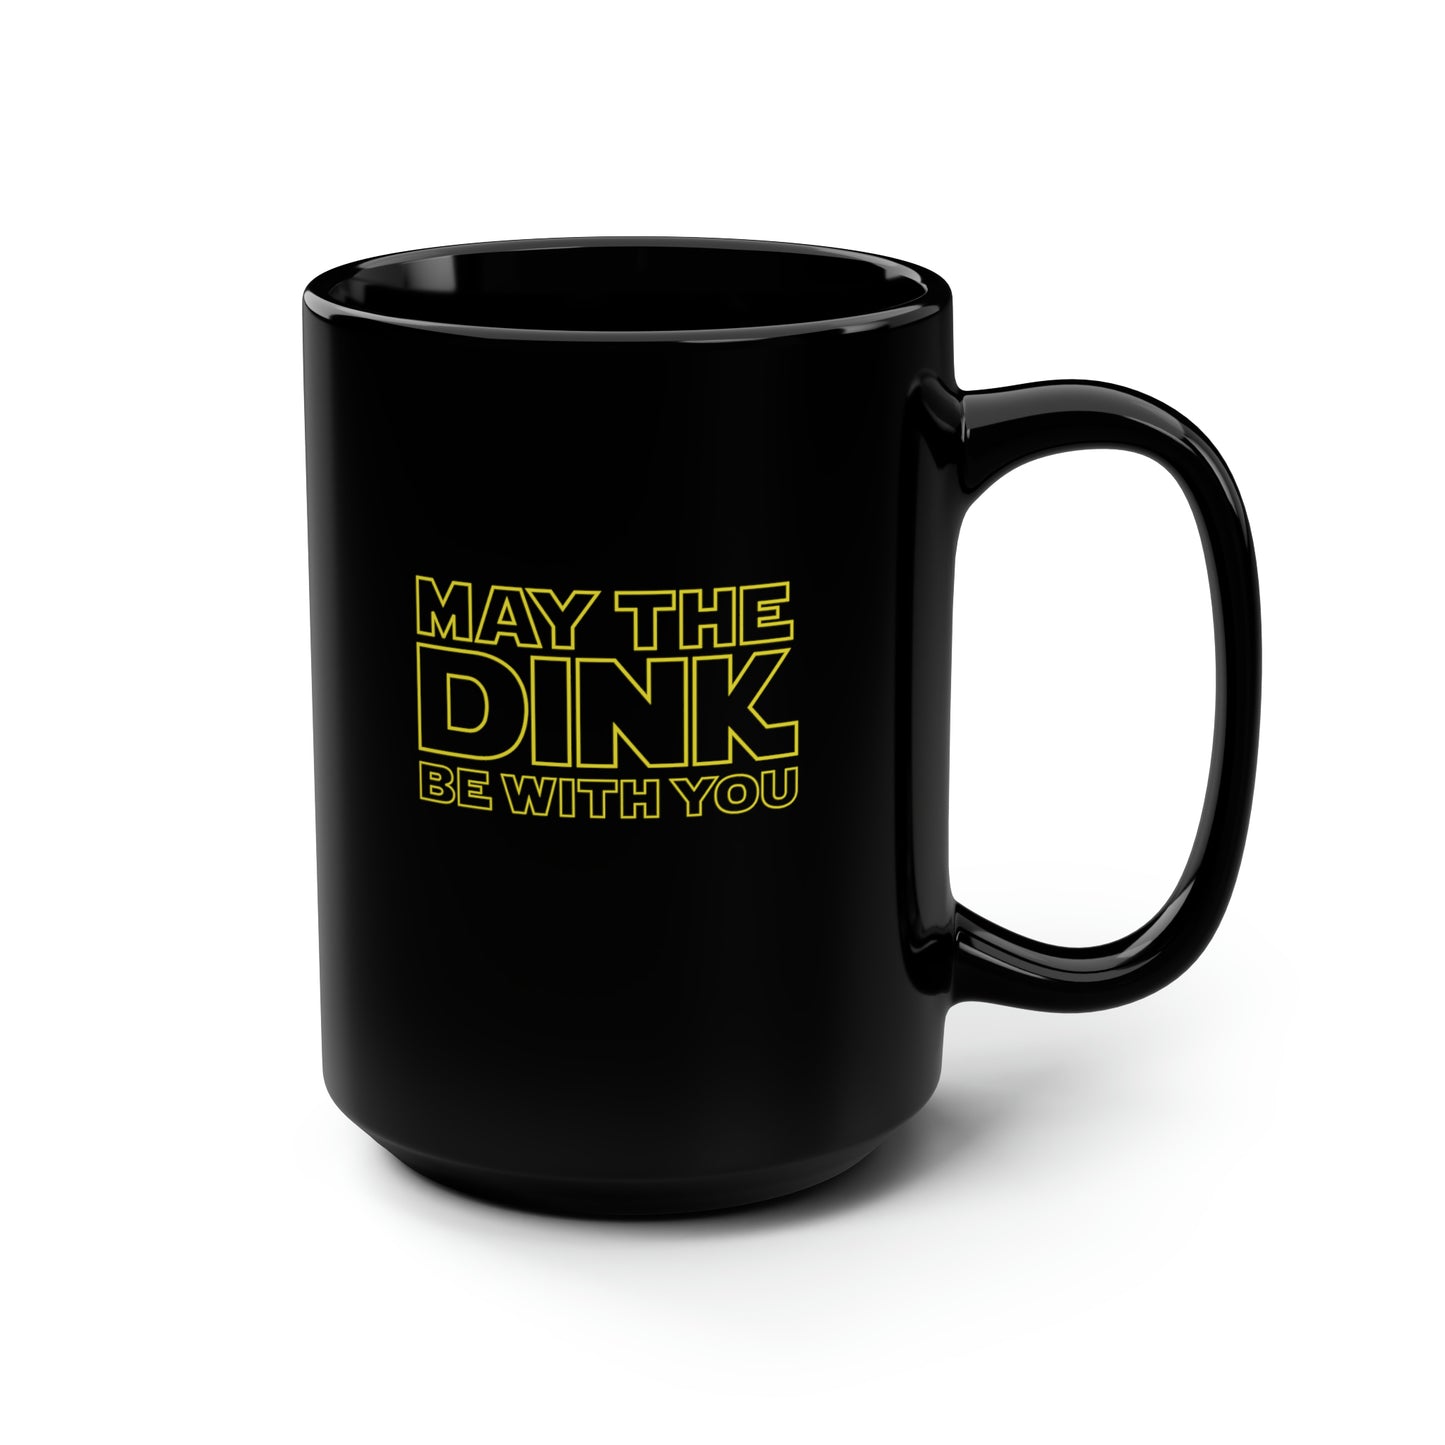 May The Dink Be With You.  Yellow Imprint. 15 Oz Black Coffee Mug